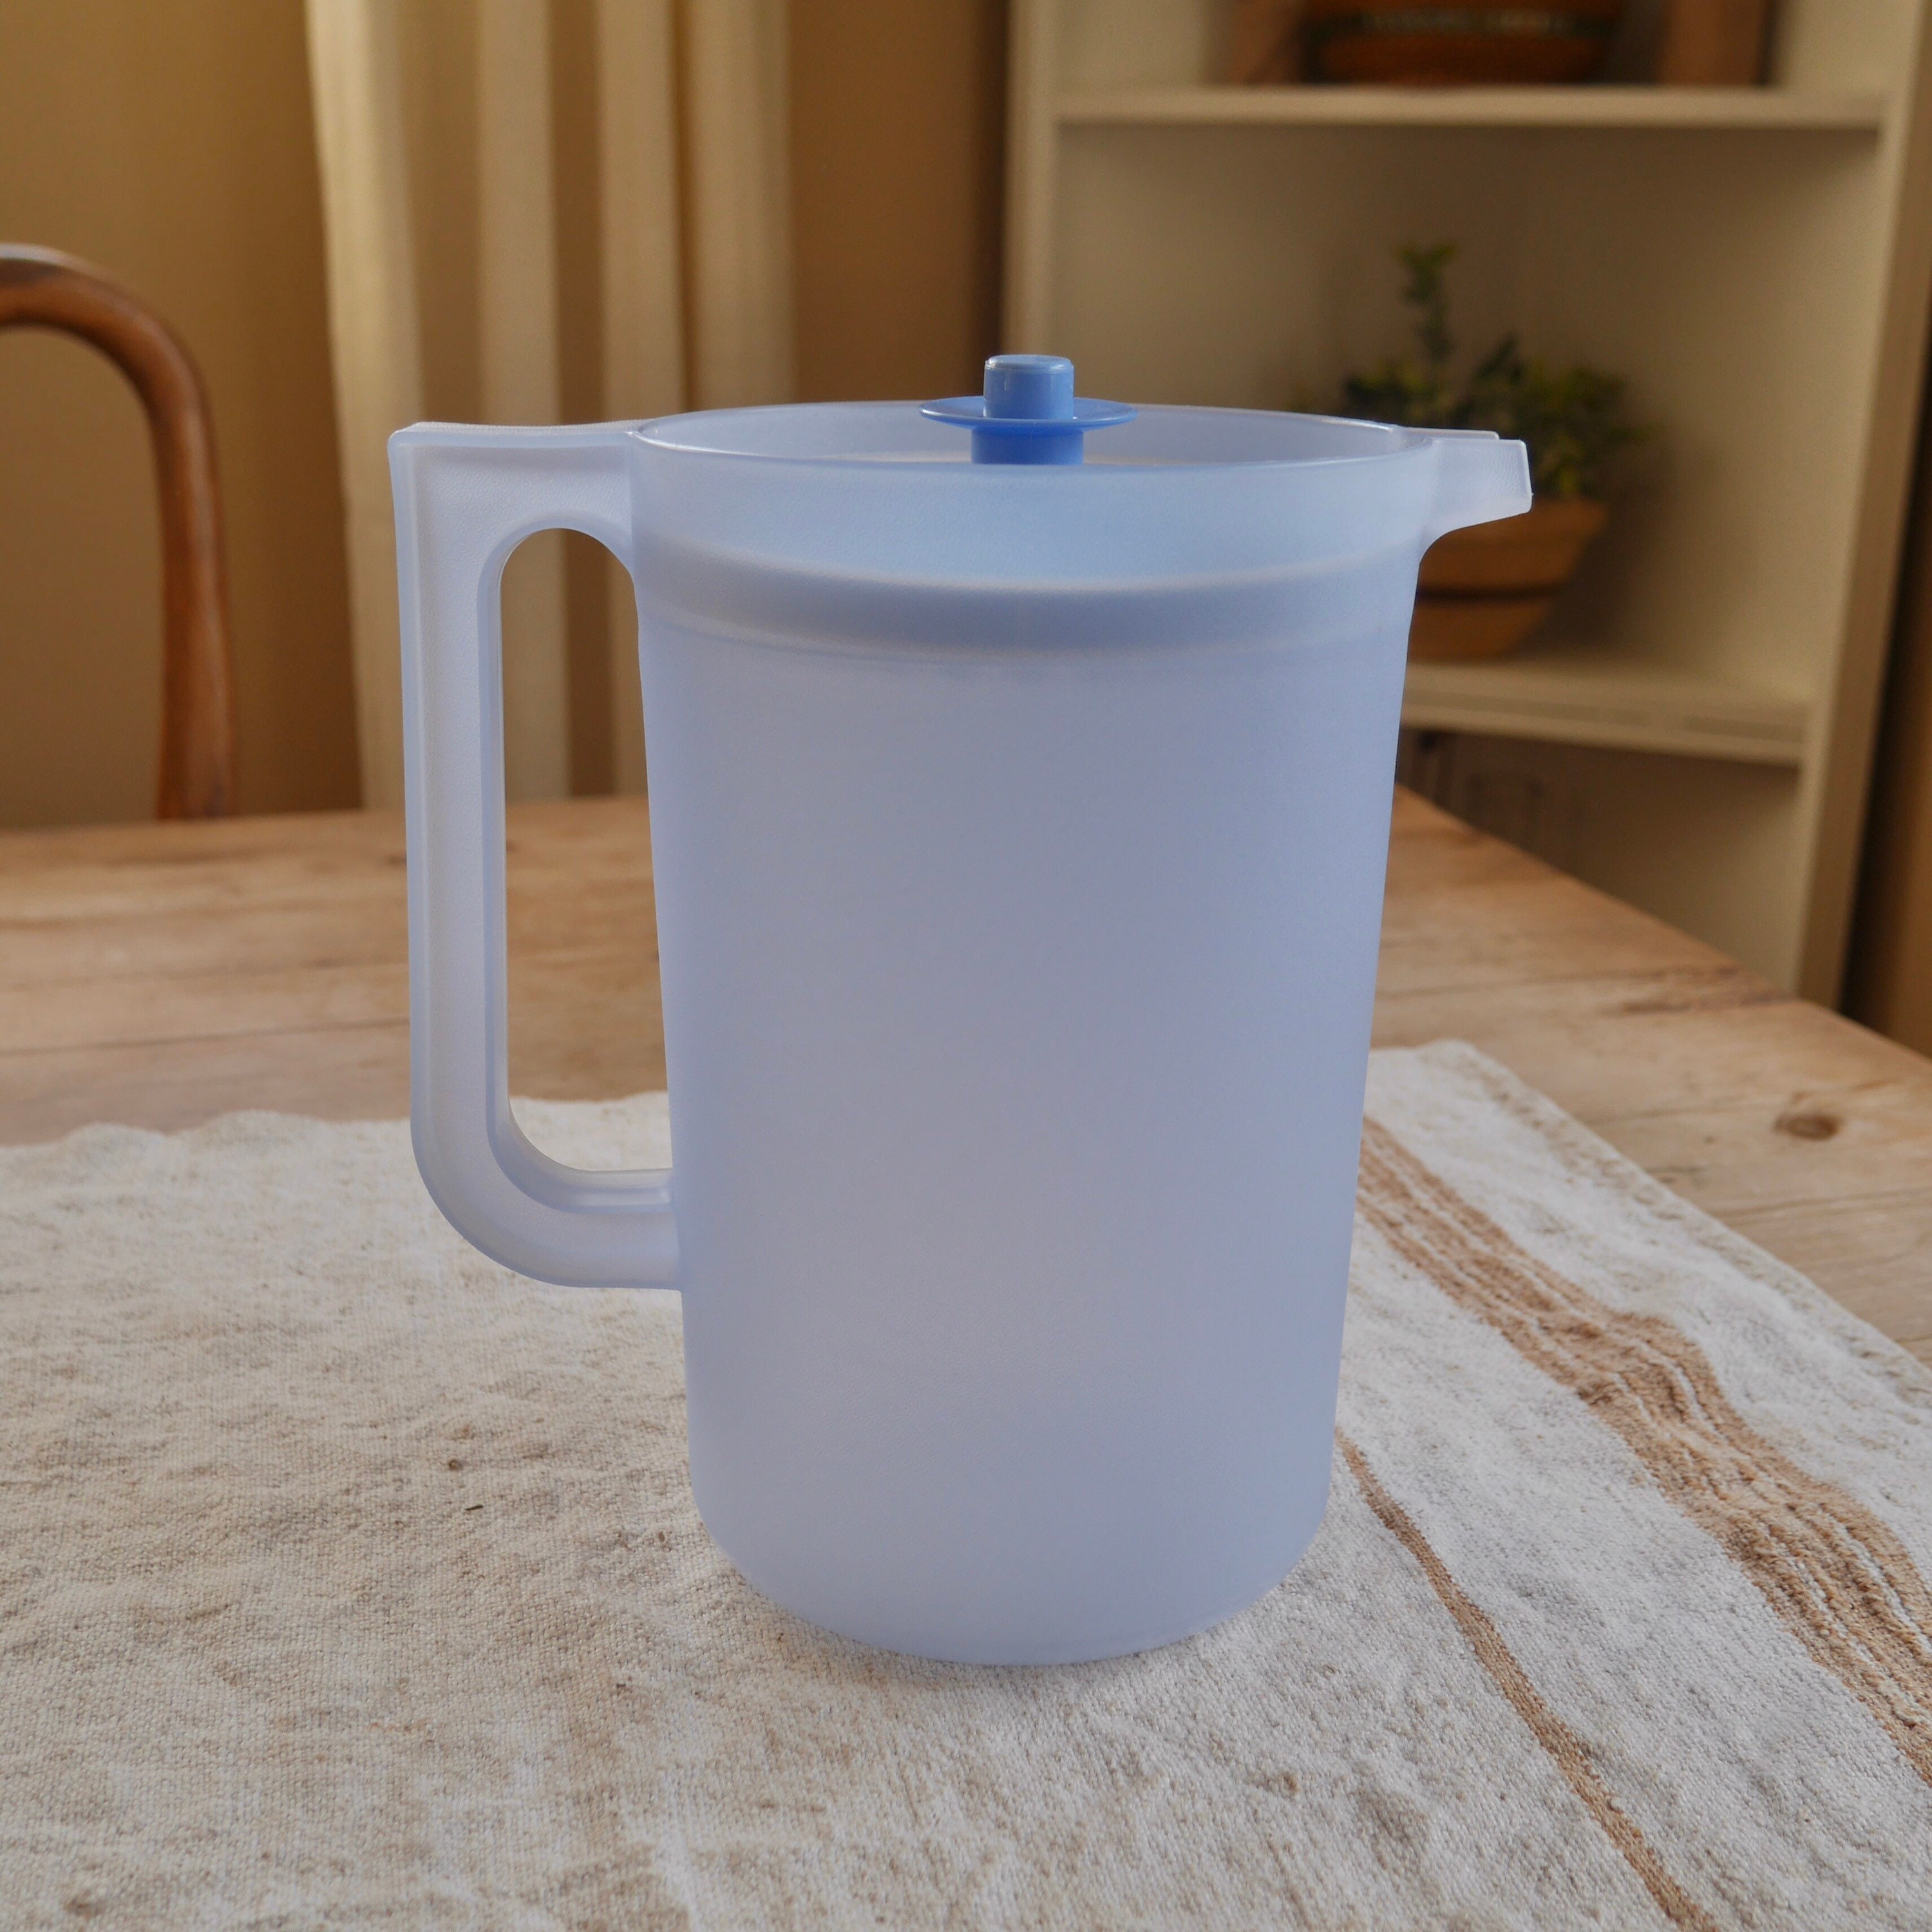 Tupperware 1676 Sheer Frosted Beverage Pitcher Blue Push Button